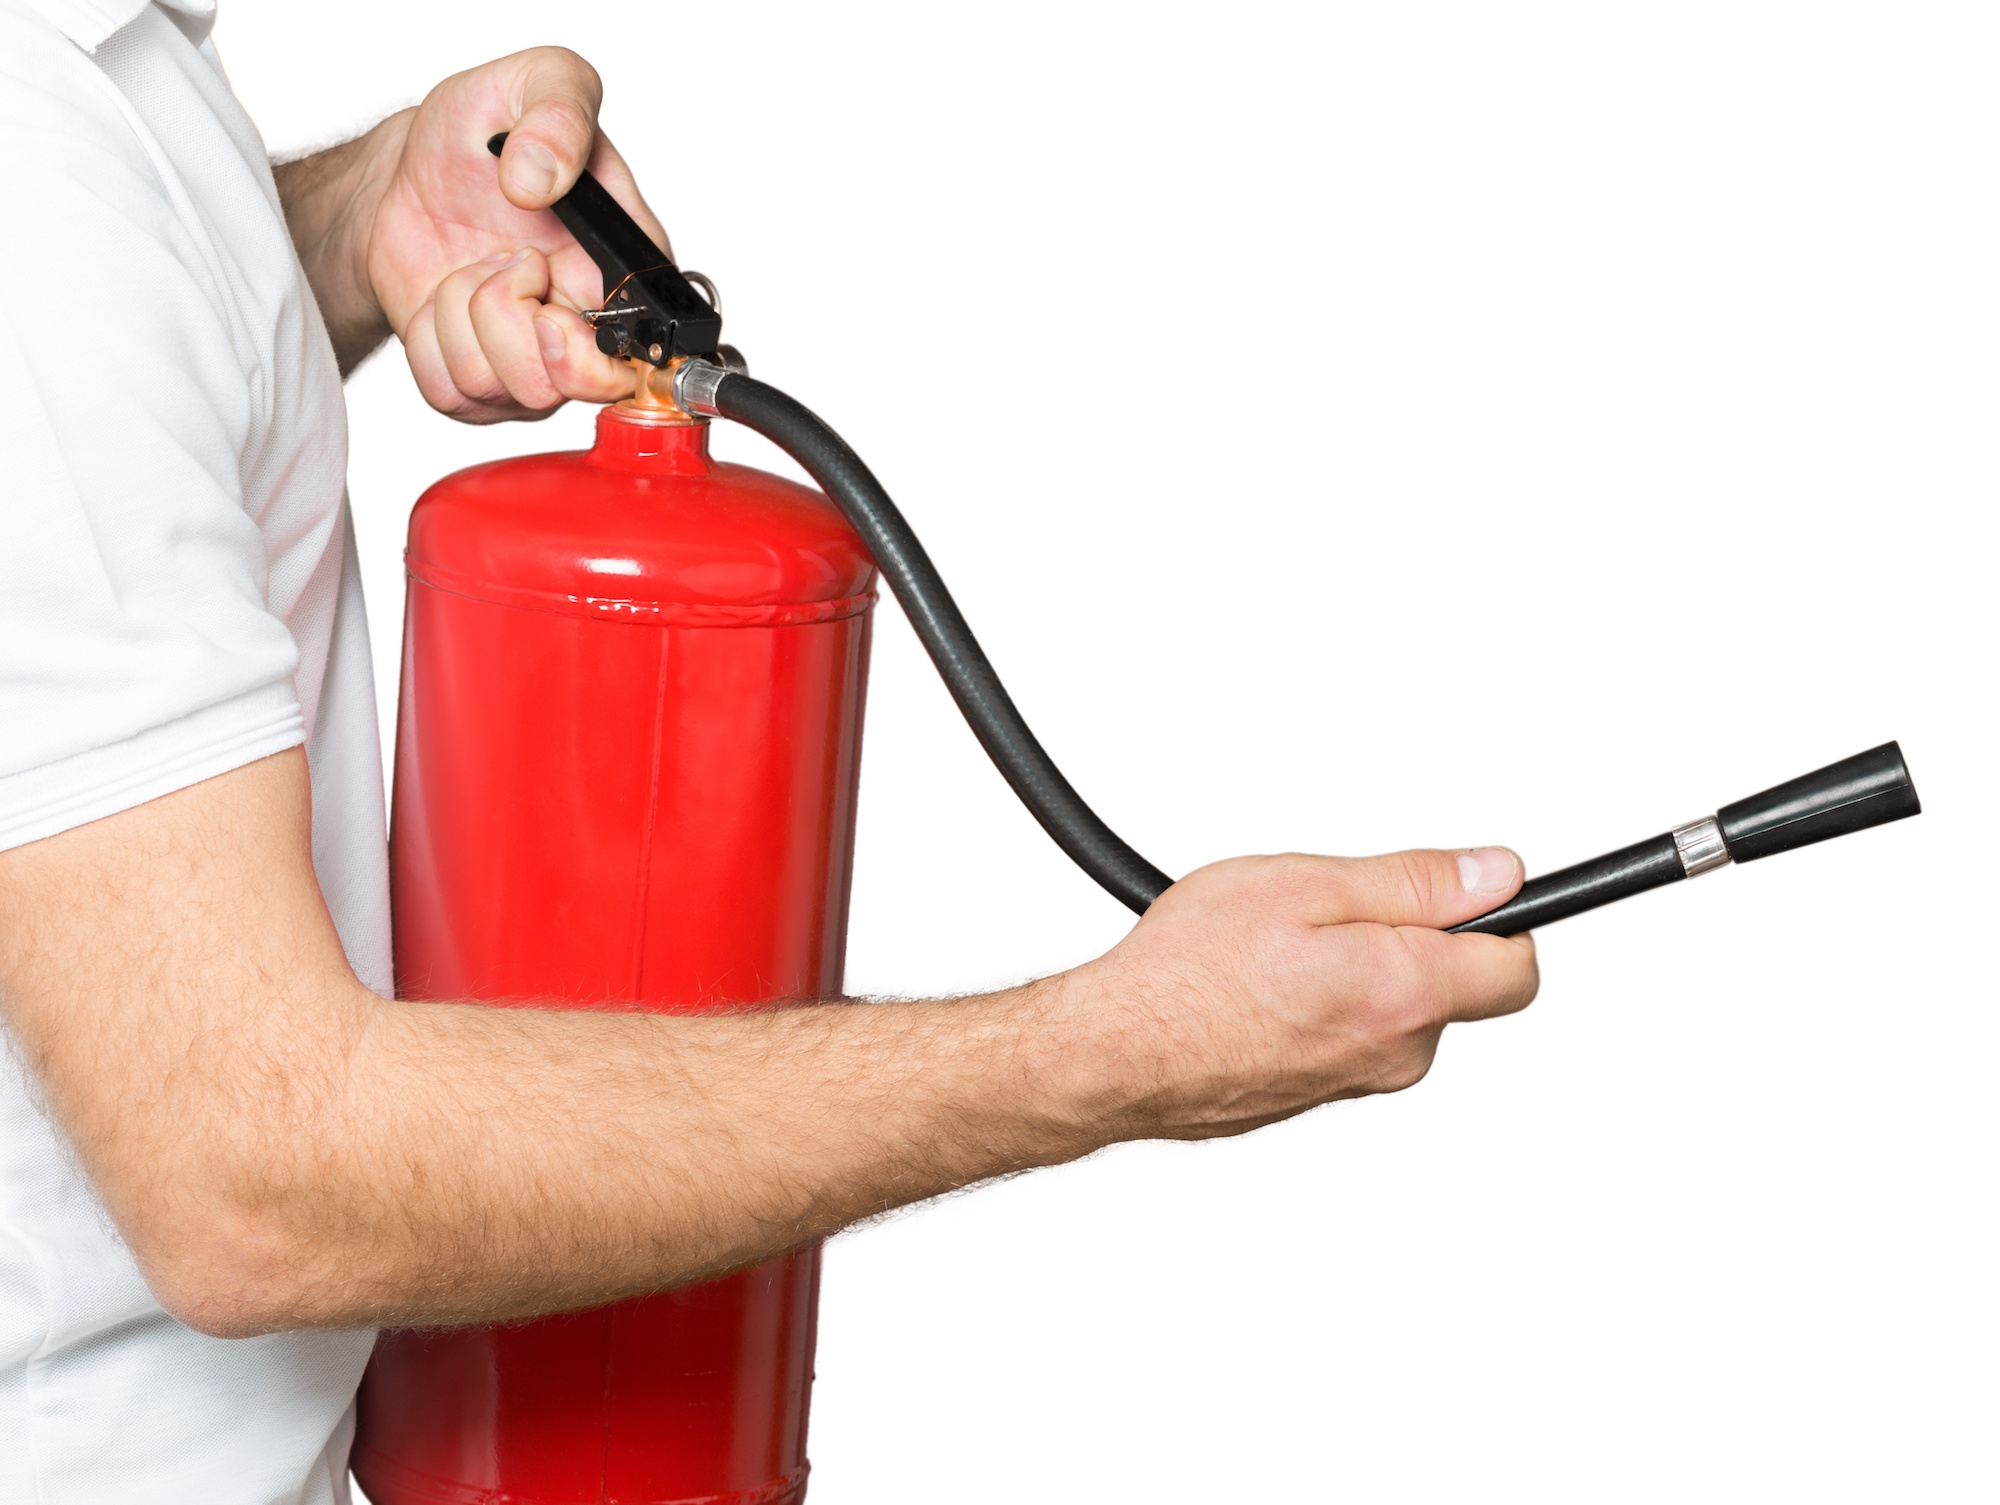 where to buy fire extinguisher near me